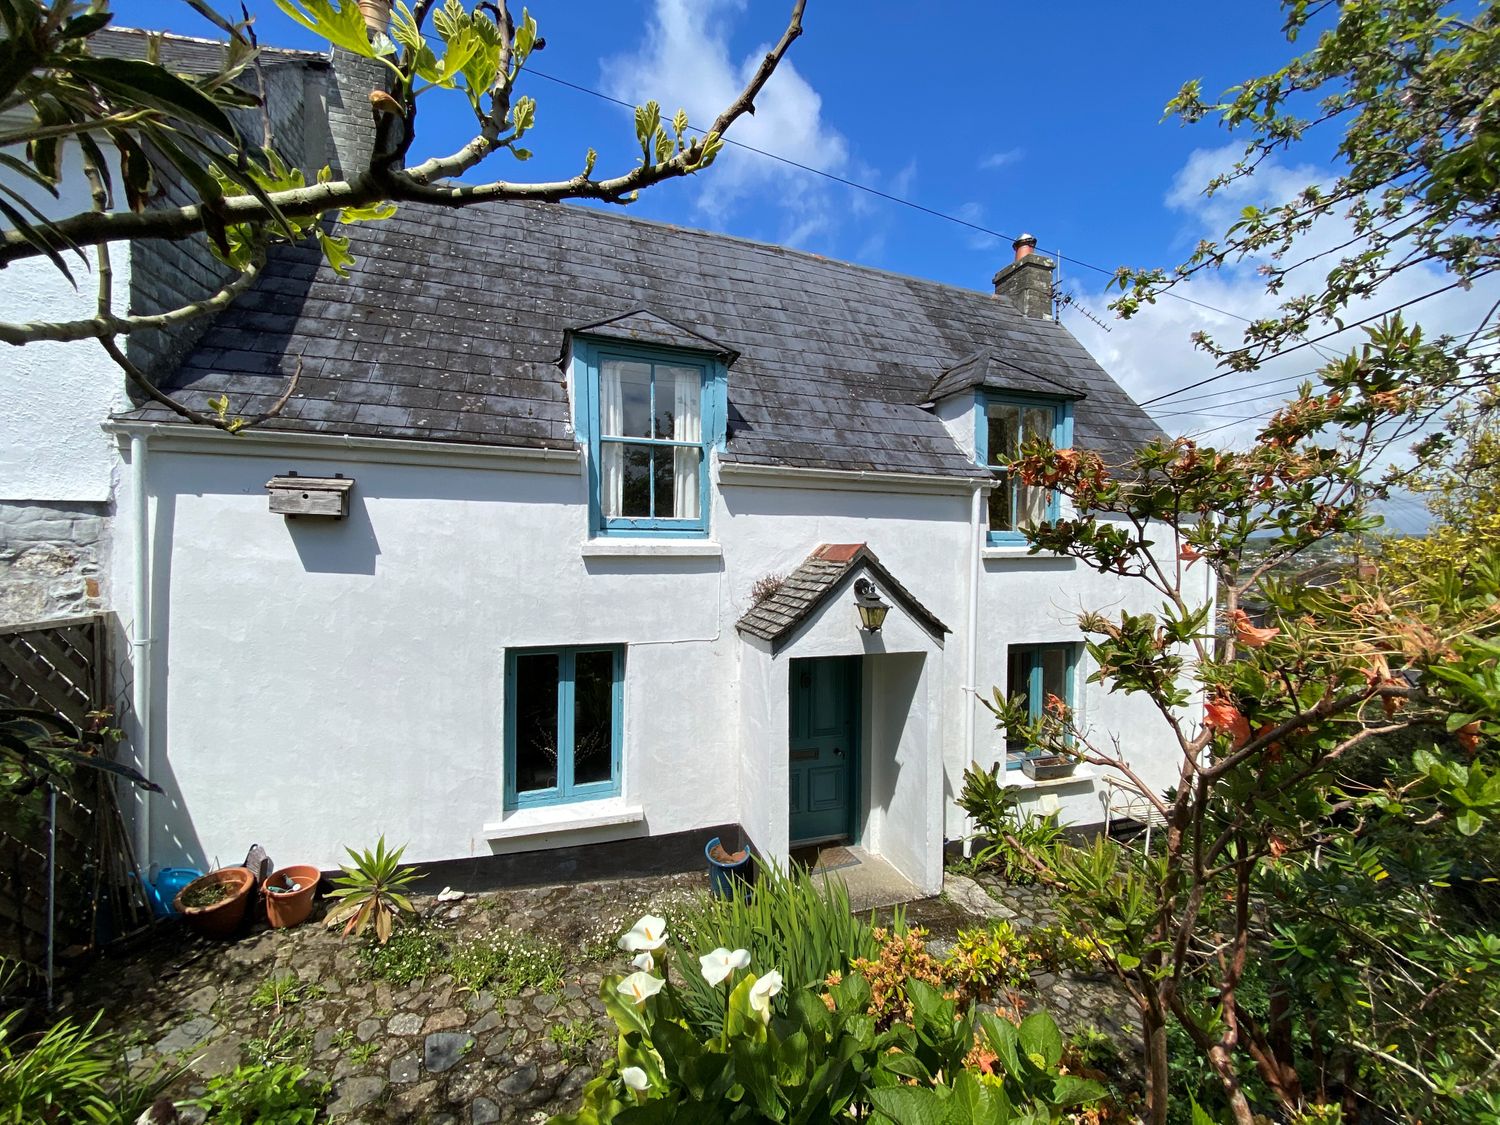 29 St. Peters Hill - Cornwall - 1083326 - photo 1